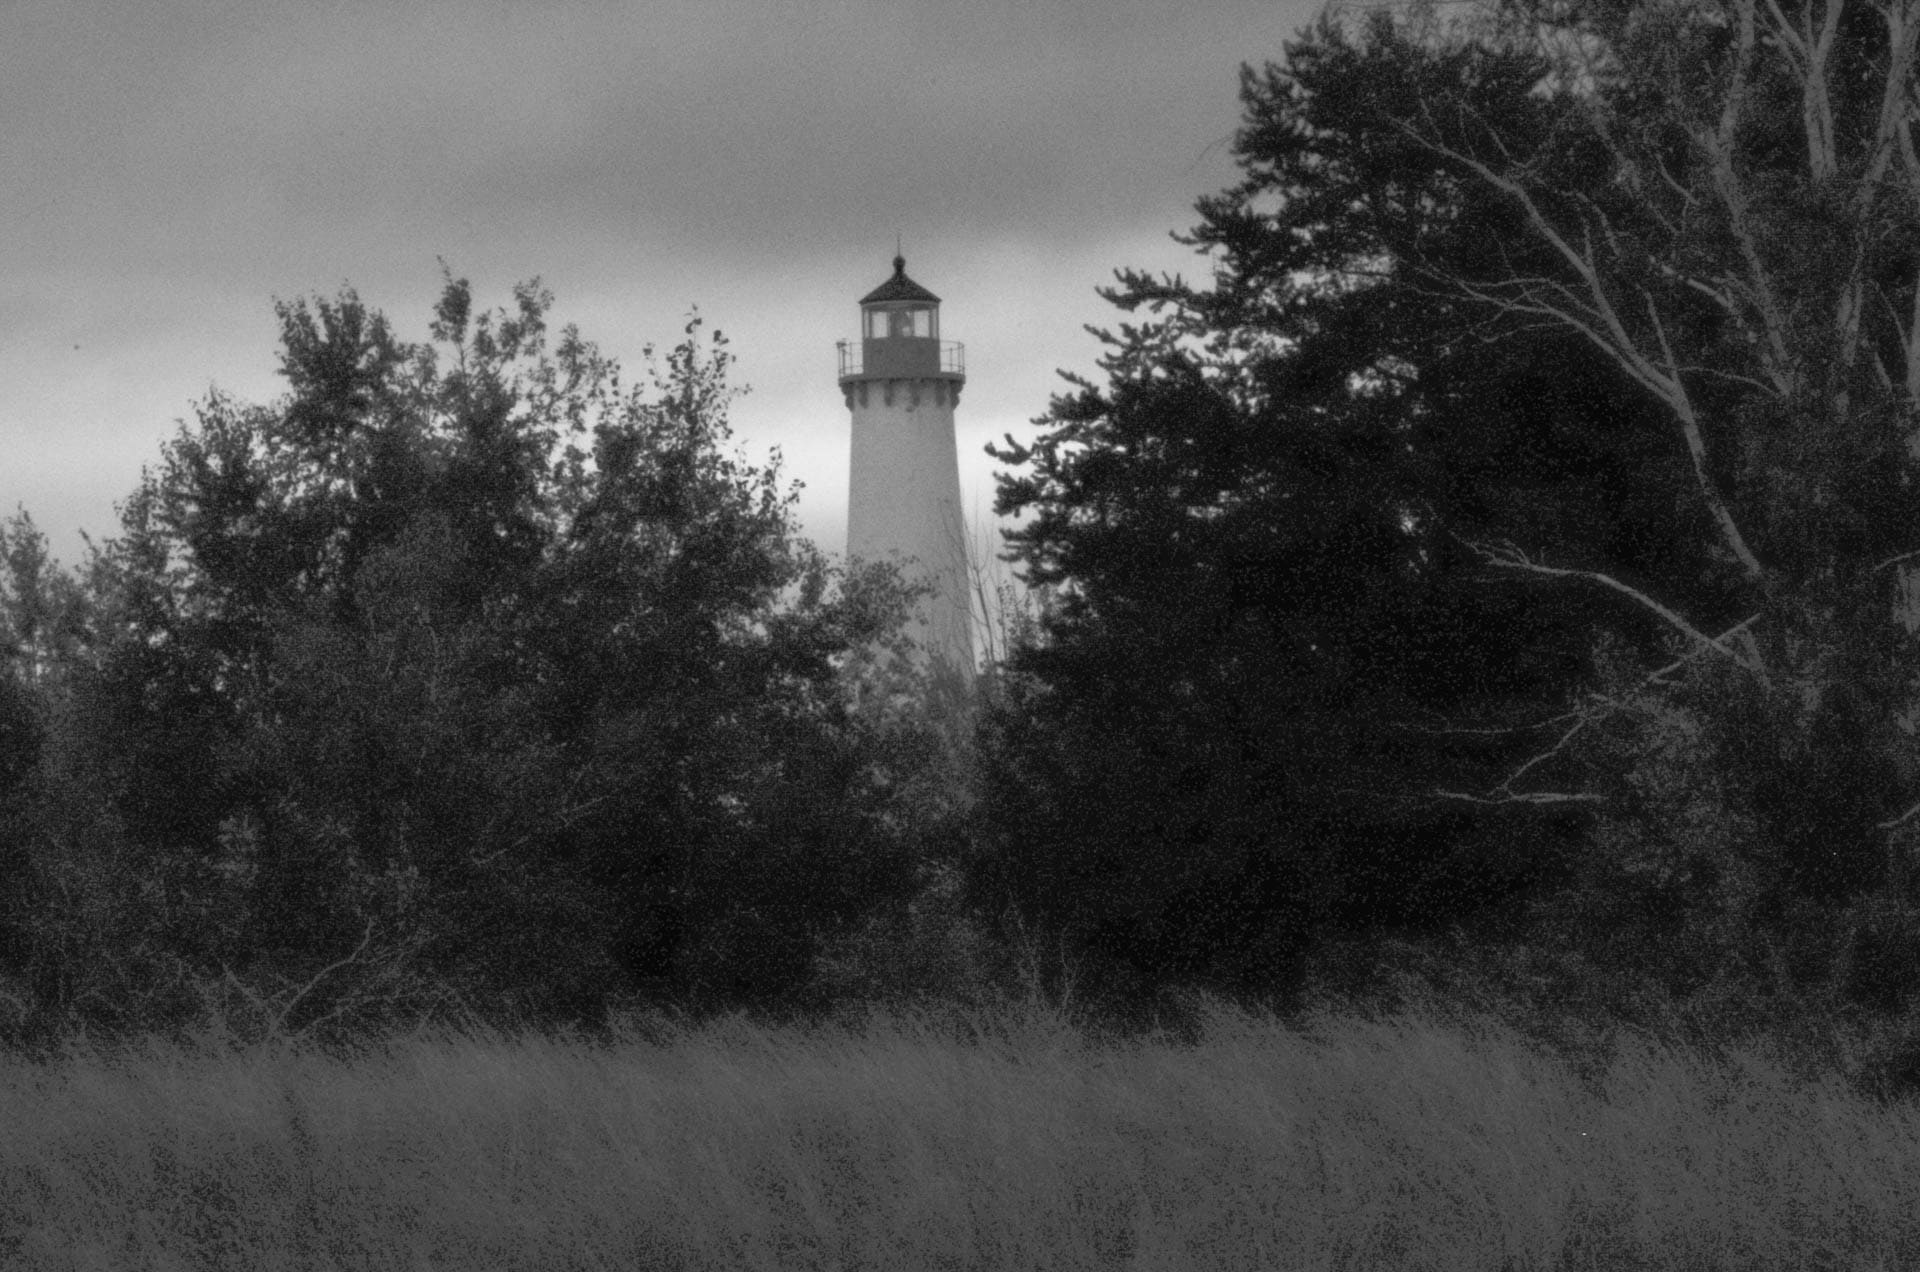 Tawas Point lighthouse